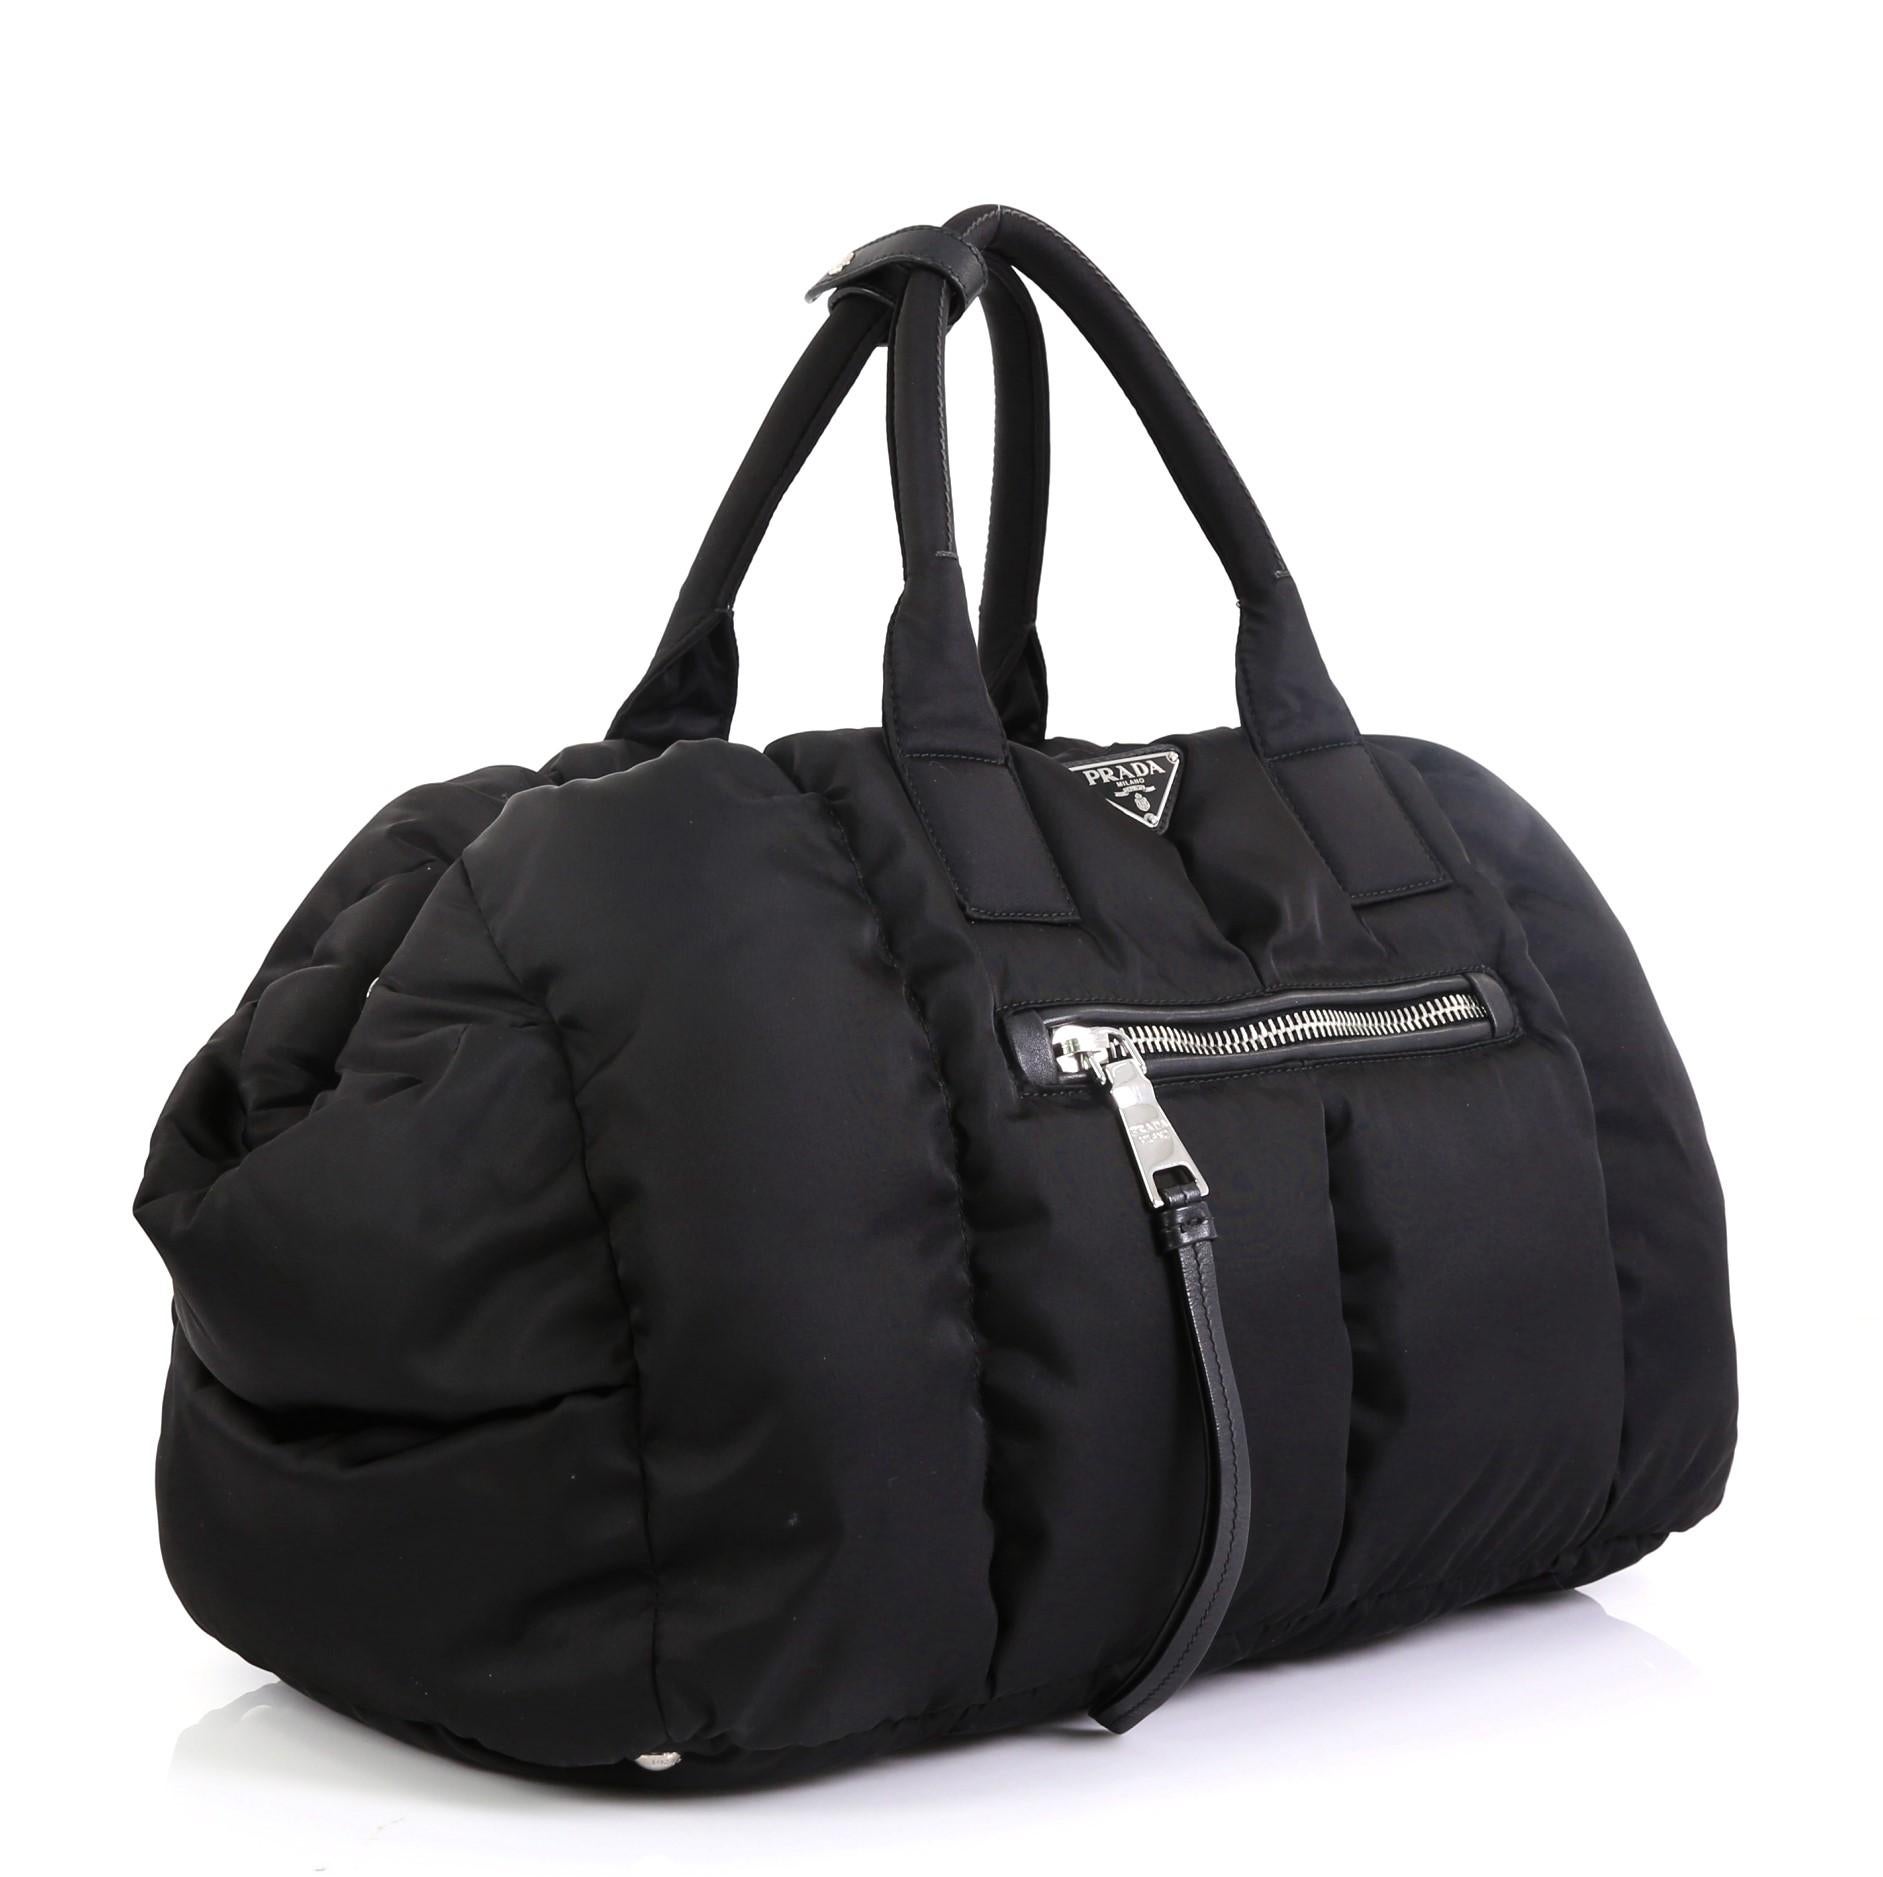 This Prada Bomber Convertible Tote Tessuto Large, crafted in black tessuto nylon, features dual-rolled handles, exterior zip pockets, and silver-tone hardware. Its top zip closure opens to a black nylon interior with zip and slip pockets.